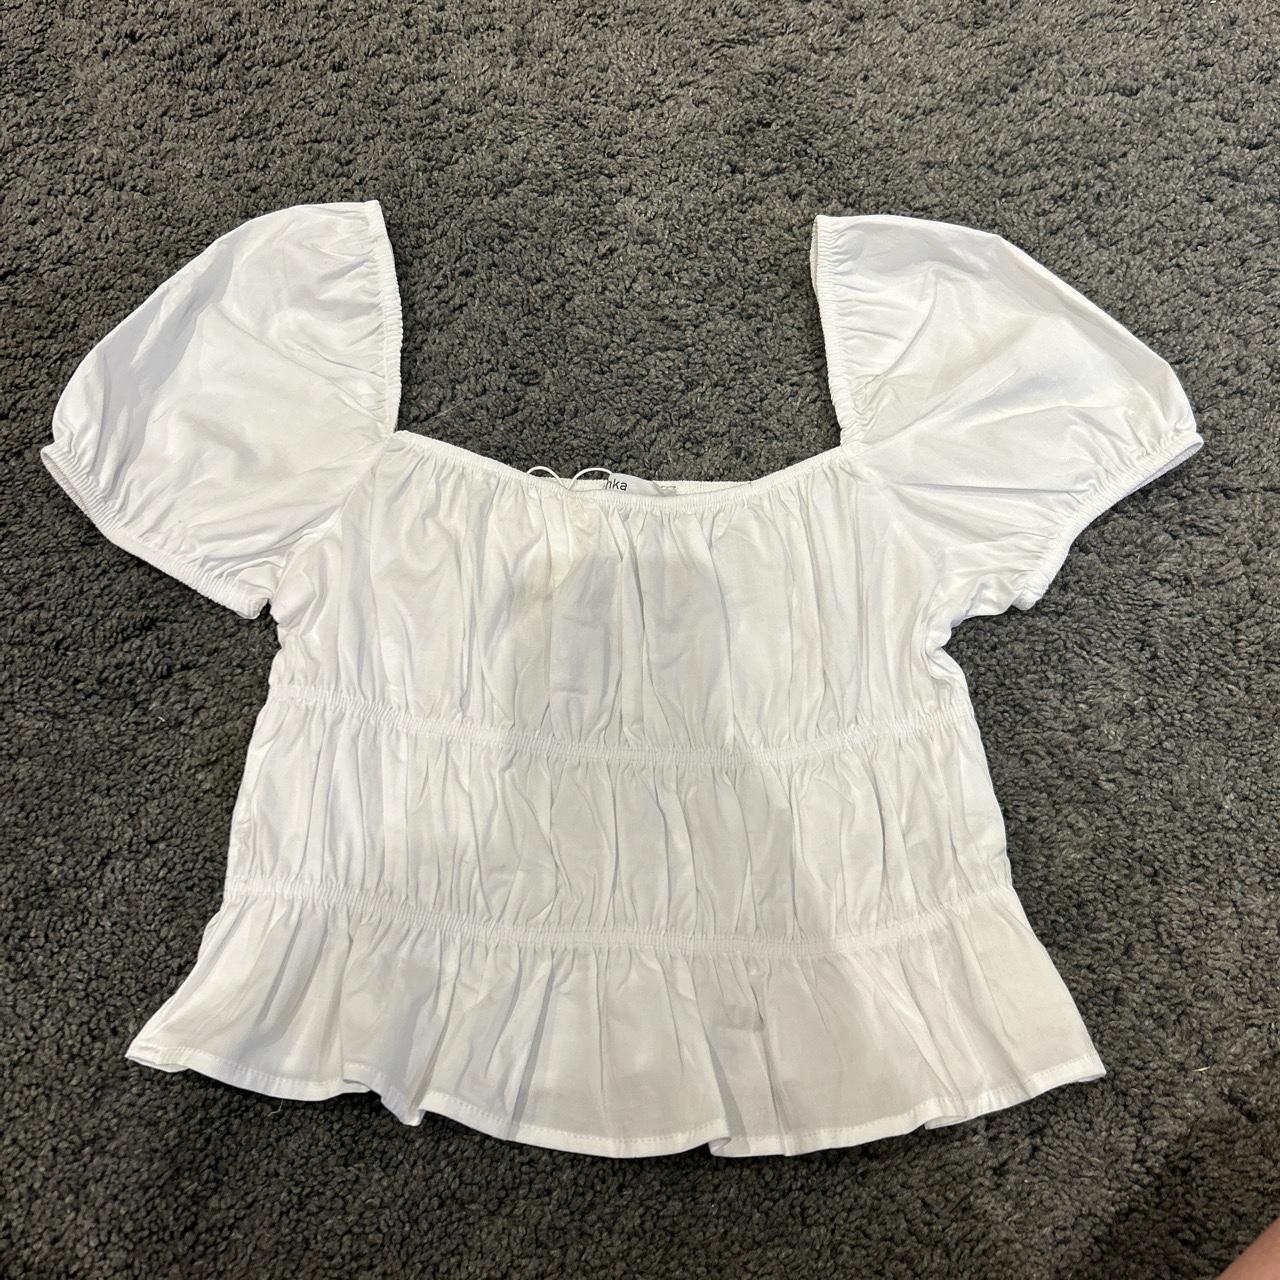 White bershka blouse, new with tags, bought at tk max. - Depop